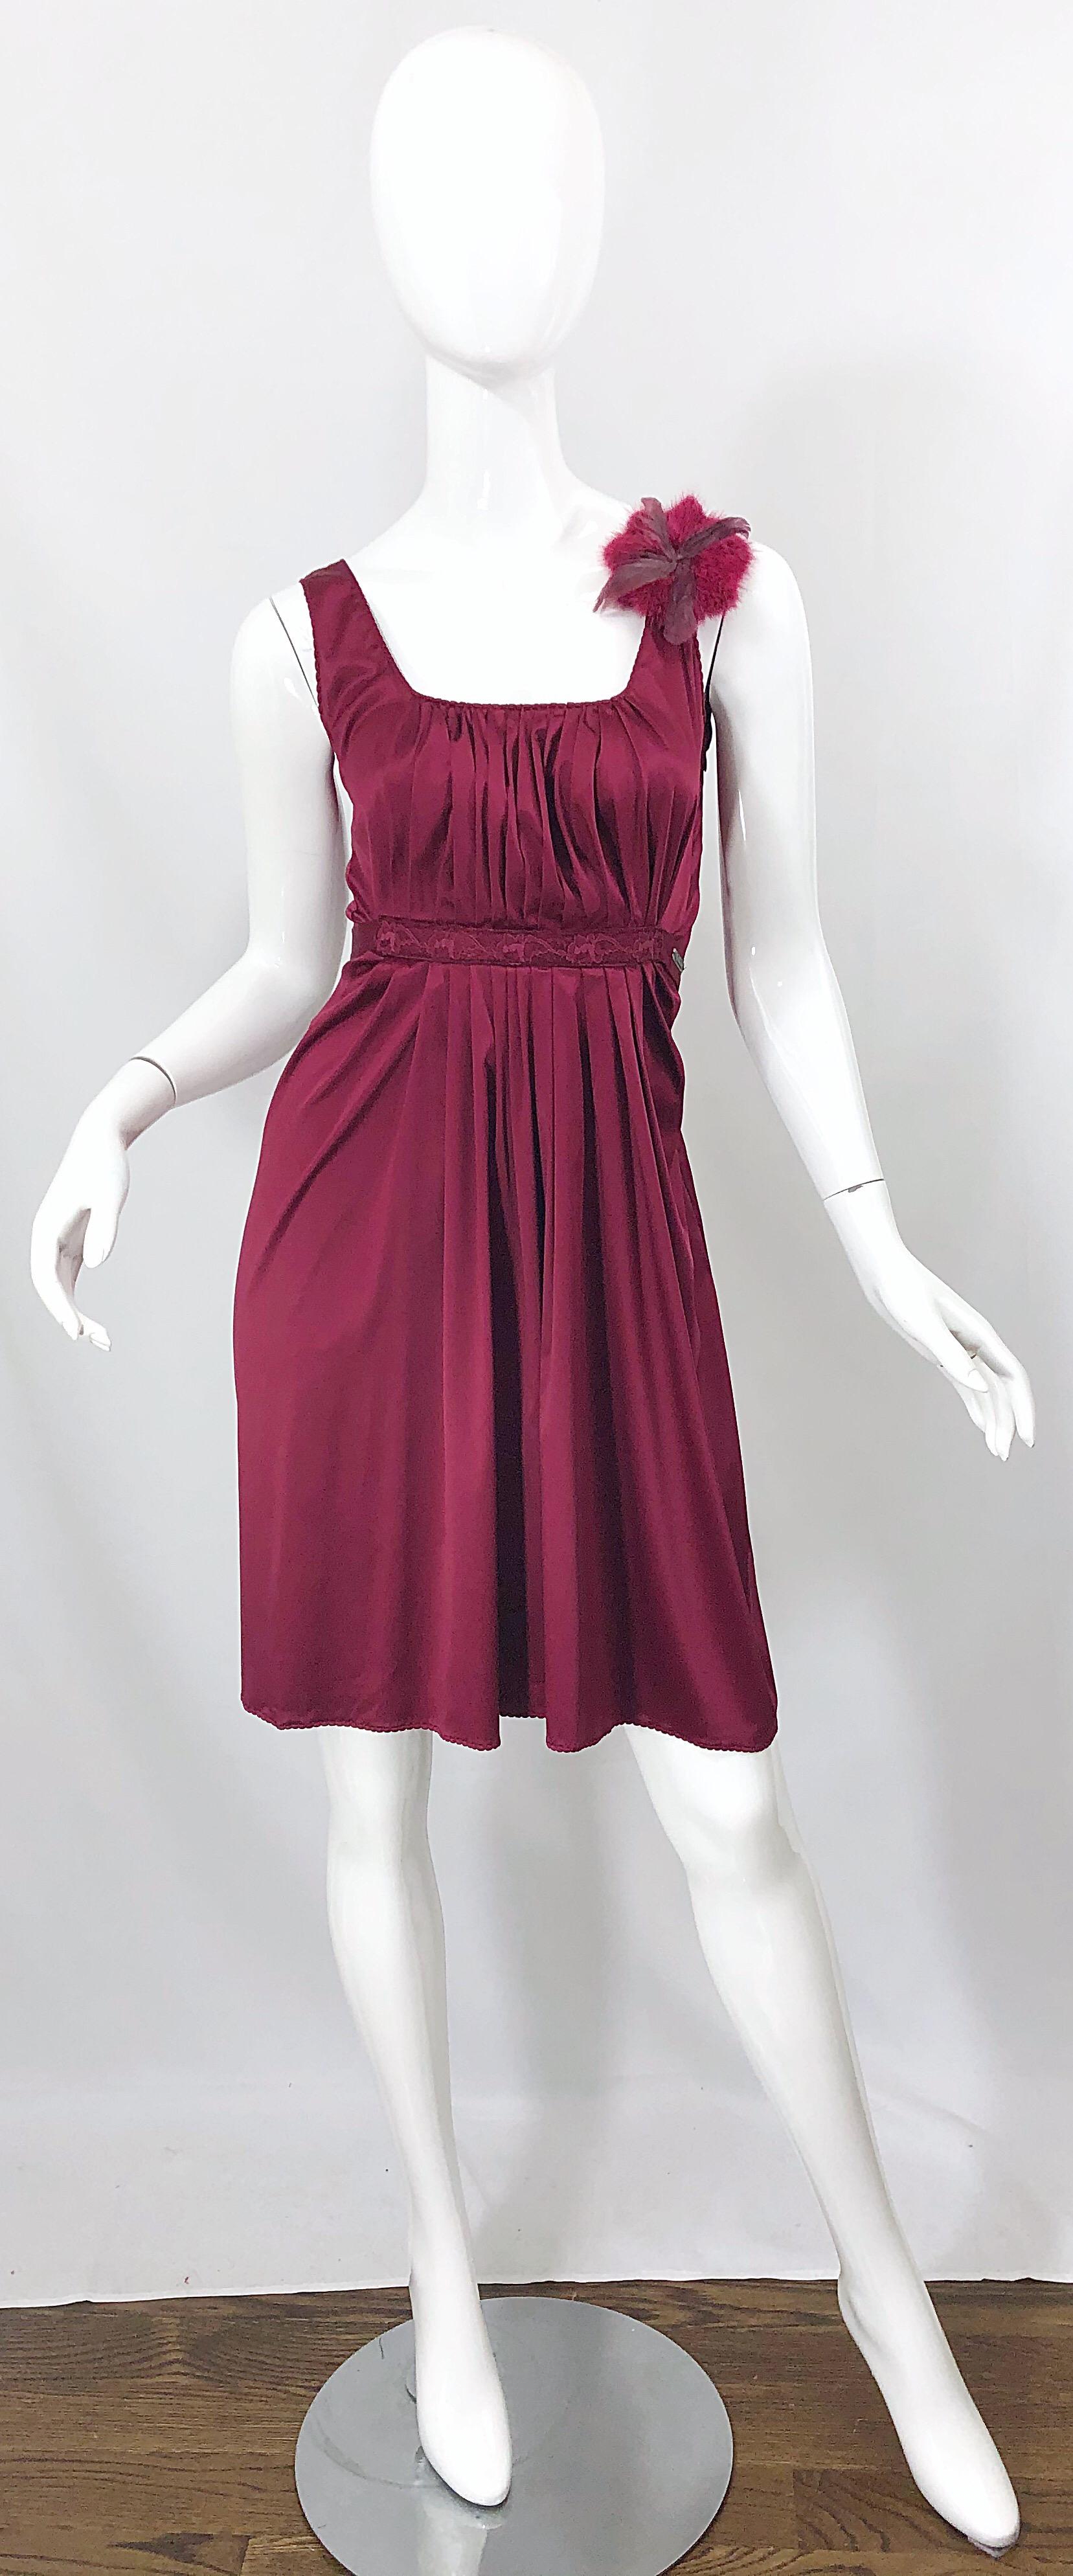 Beautiful early 2000s JOHN GALLIANO burgundy / maroon / merlot silk sleeveless dress with removable feather brooch! Pleated bodice with a tie at back waistband to adjust waist size. Hidden zipper up the side with hook-and-eye closure. Feather brooch